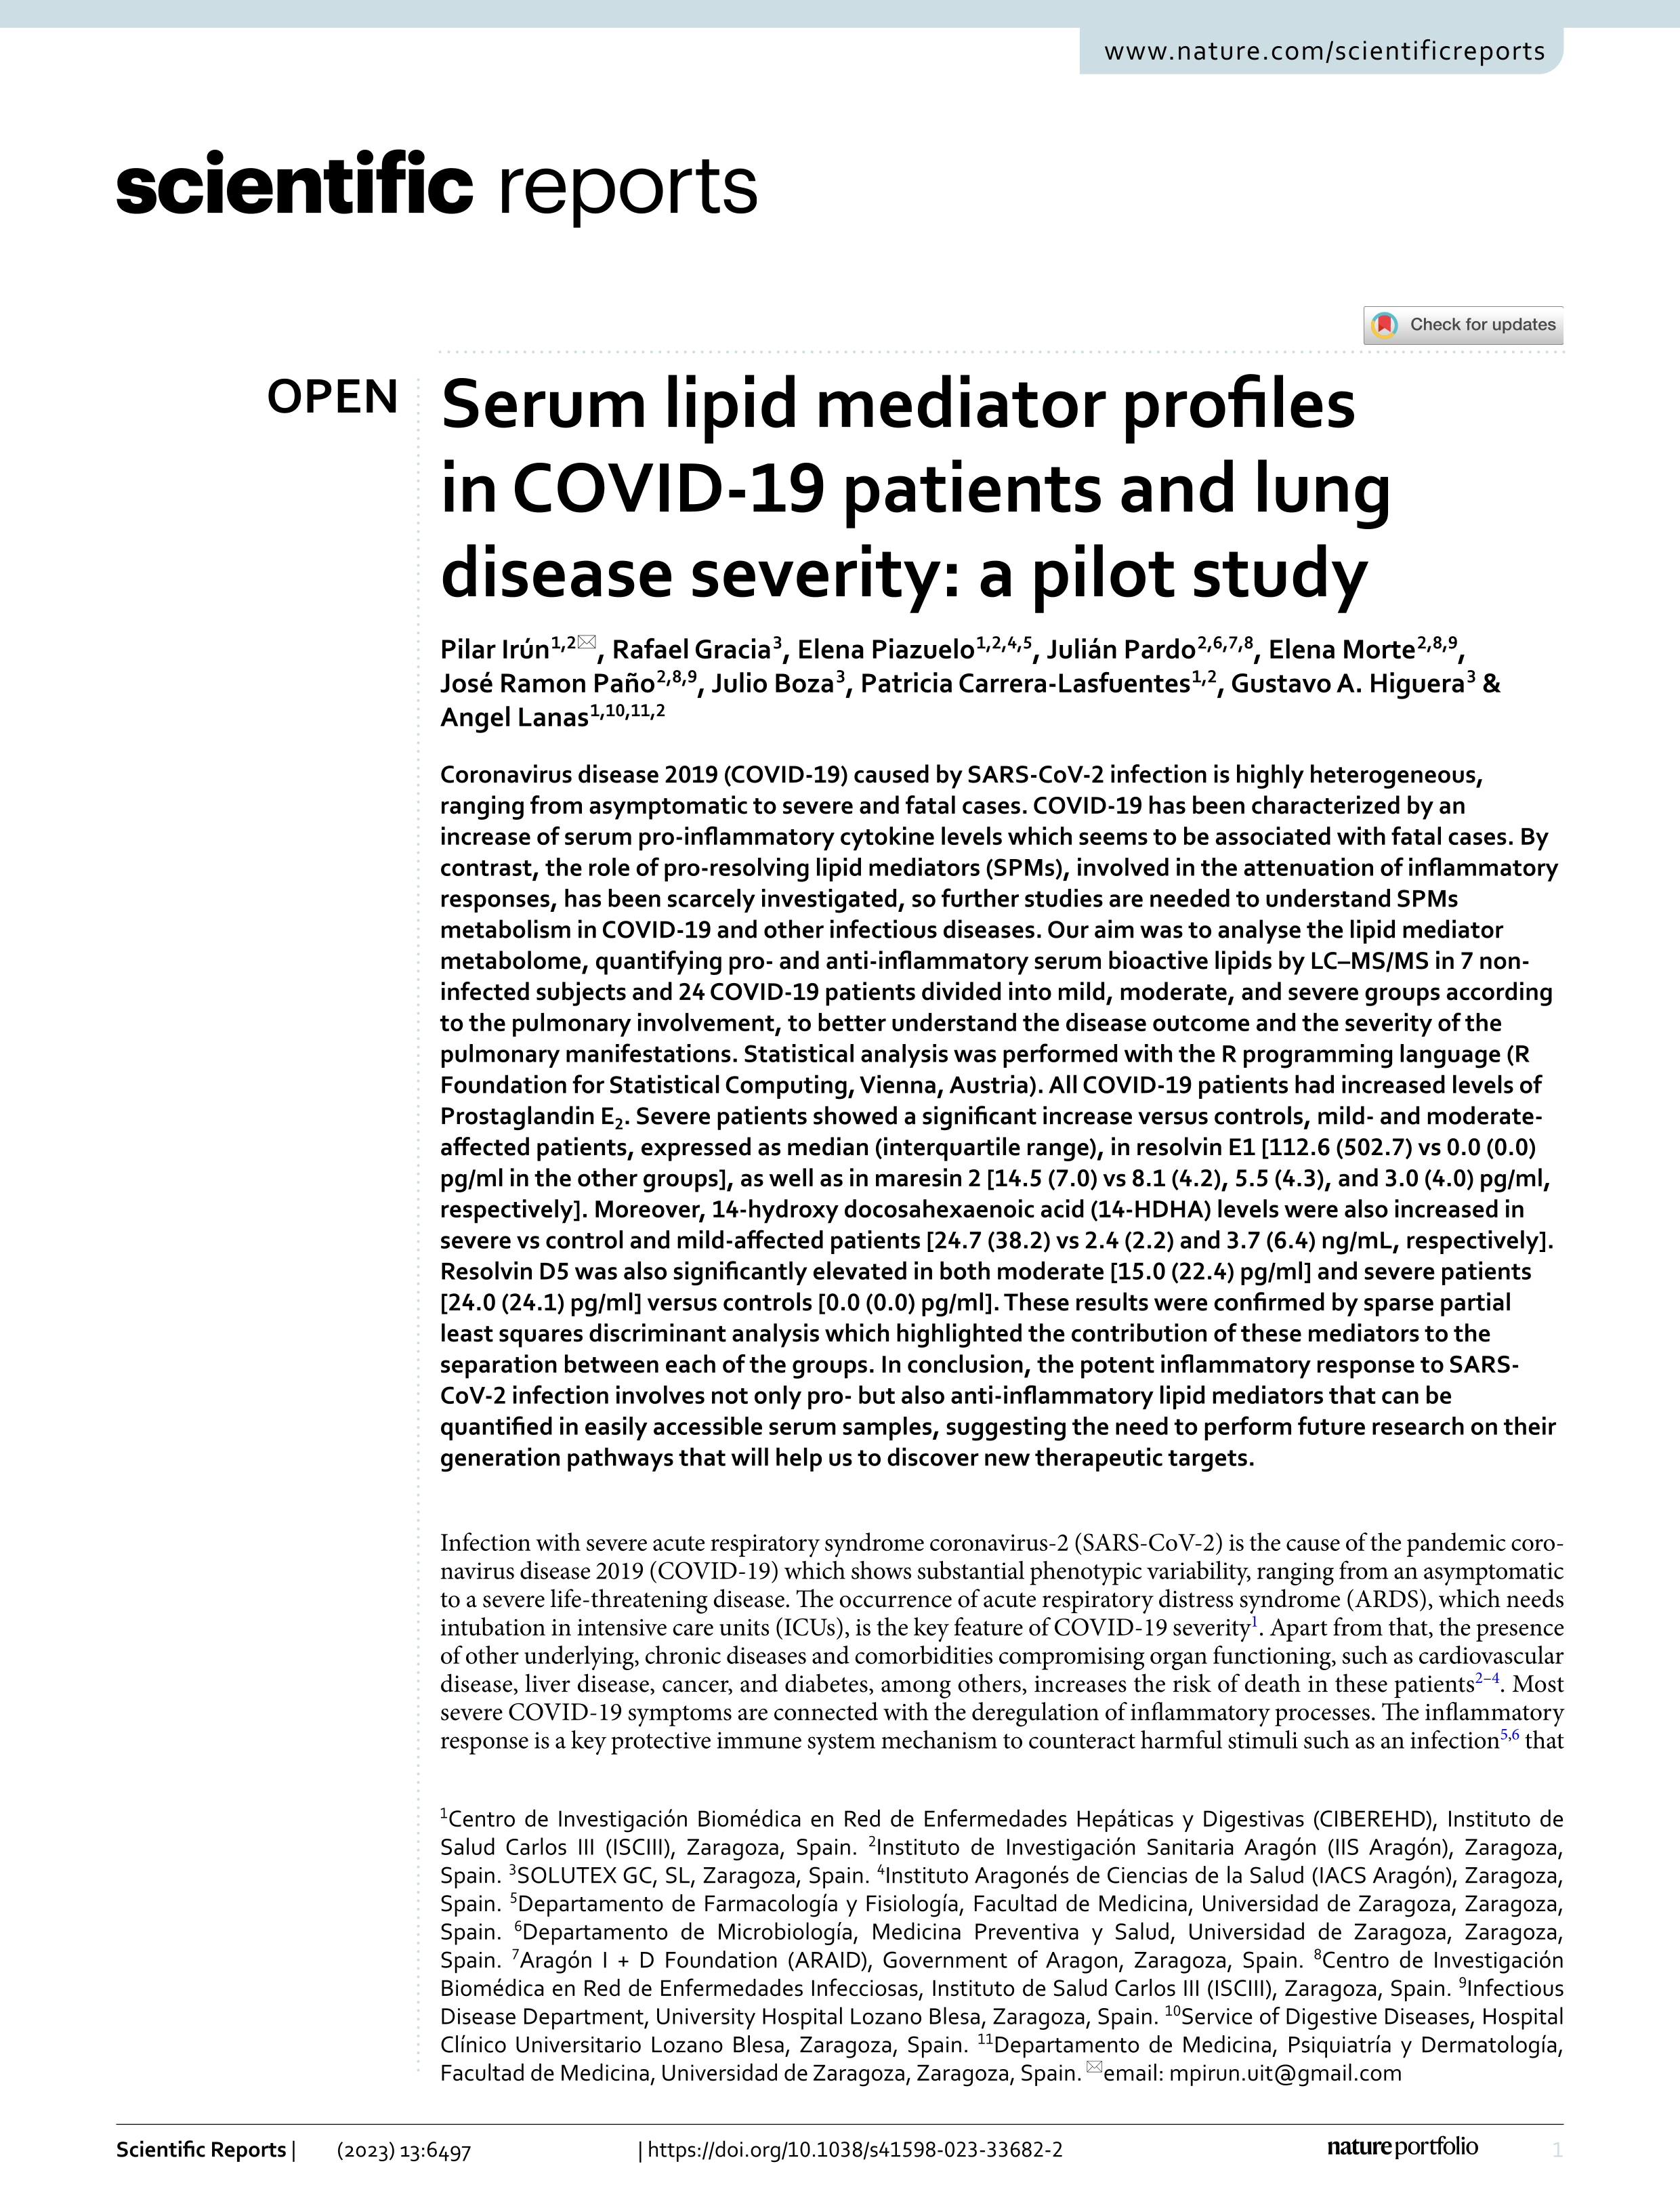 Serum lipid mediator profiles in COVID-19 patients and lung disease severity: a pilot study